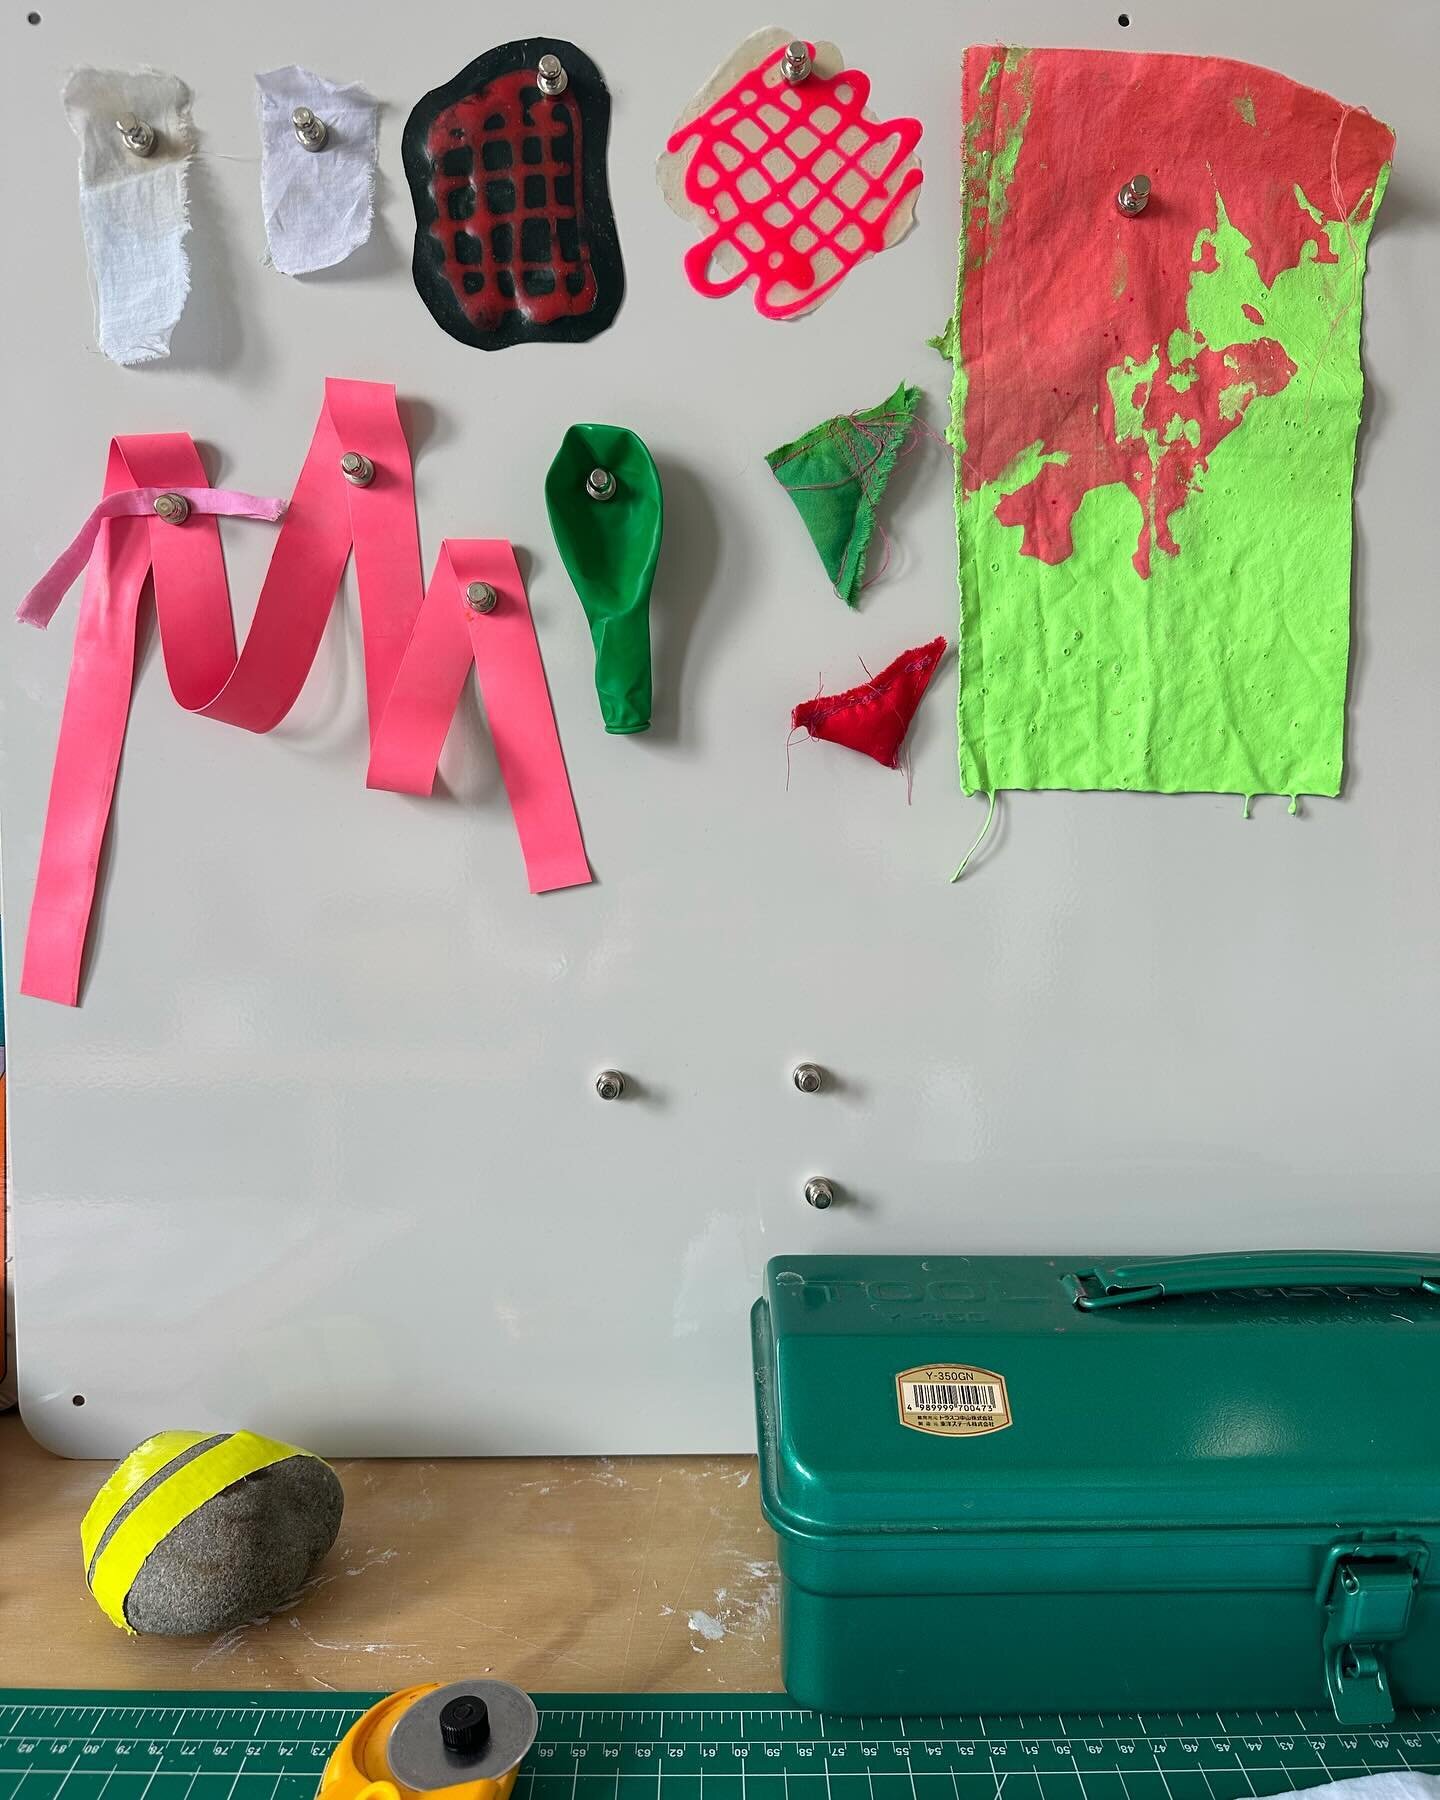 It&rsquo;s residency month! I am taking part in another focused period of making, via @thrivetogethernetwork. Here is my highly tactile inspo wall. I&rsquo;m working on some pieces for a show at the end of the month. I&rsquo;m thinking tenderly, brea